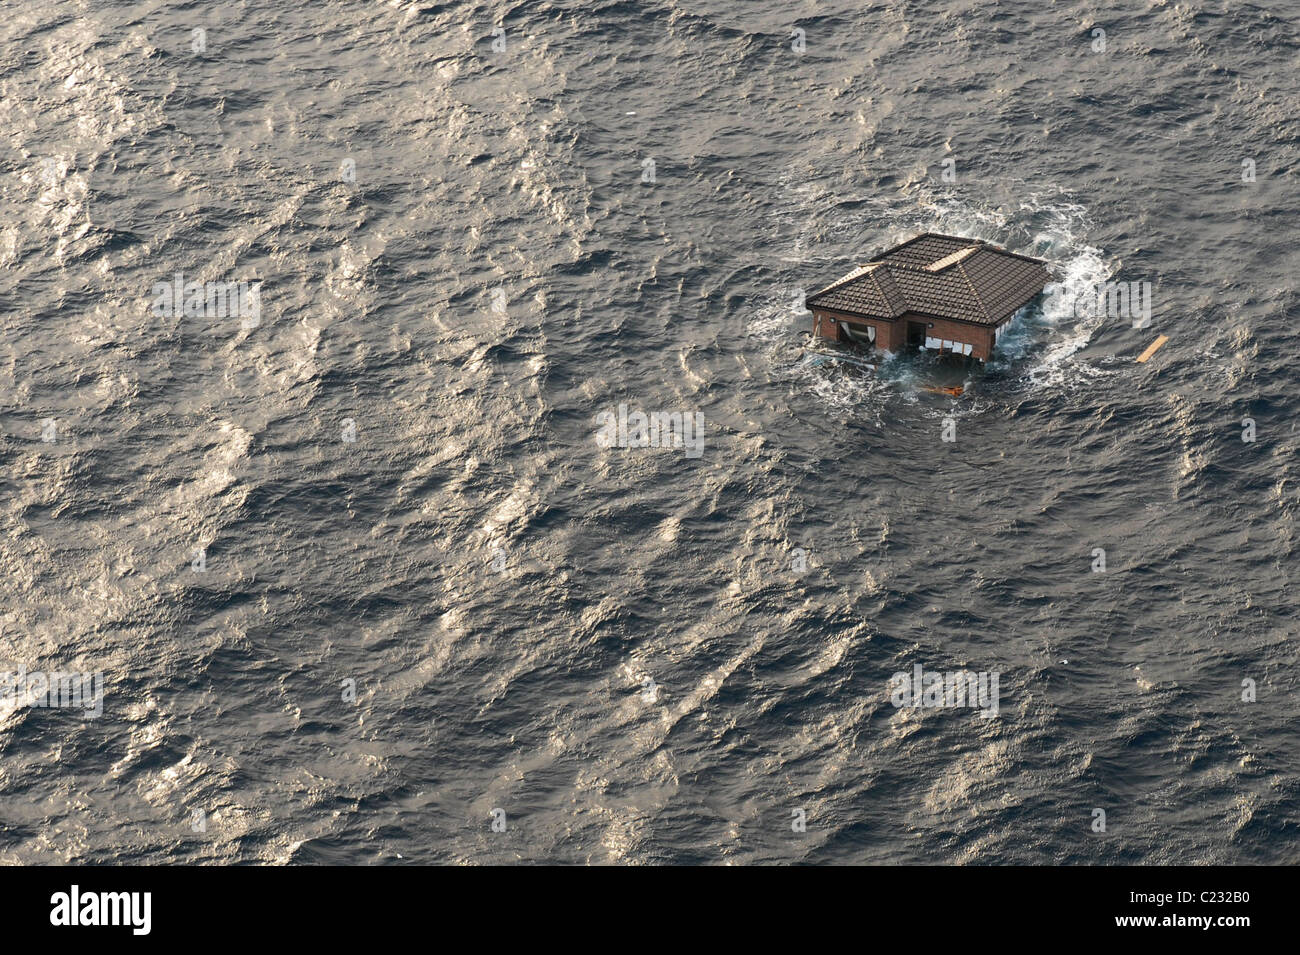 Aerial photo taken March 13 2011 of a house floating at sea near Sendai, Japan, in the aftermath of the earthquake + tsunami. Stock Photo